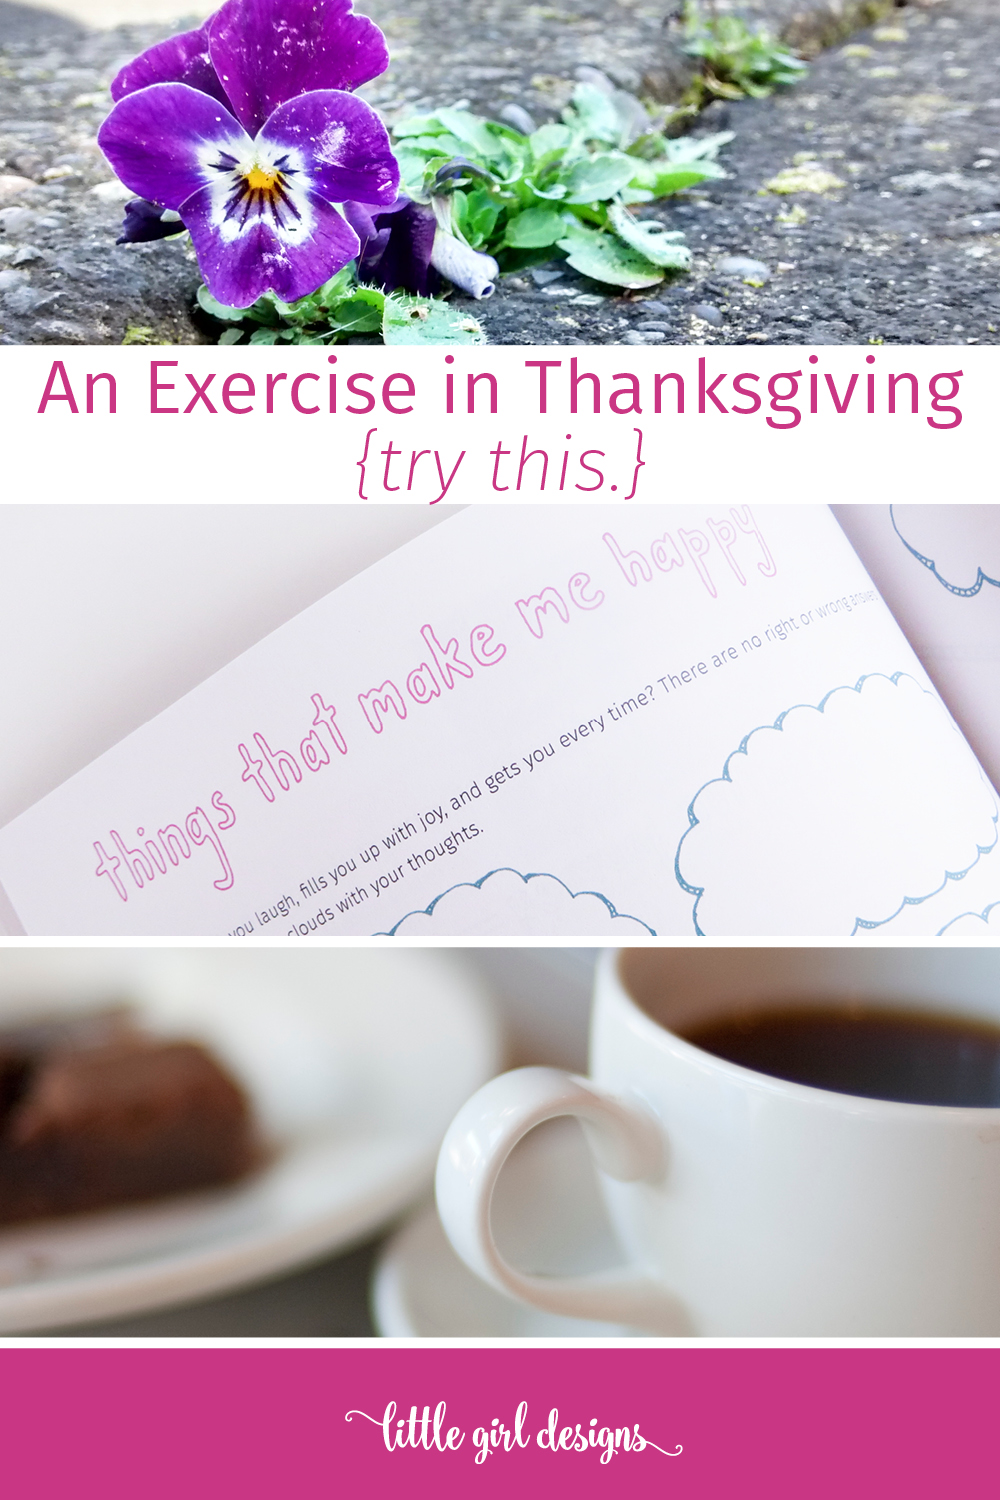 Things That Make Me Happy {An Exercise in Thanksgiving}